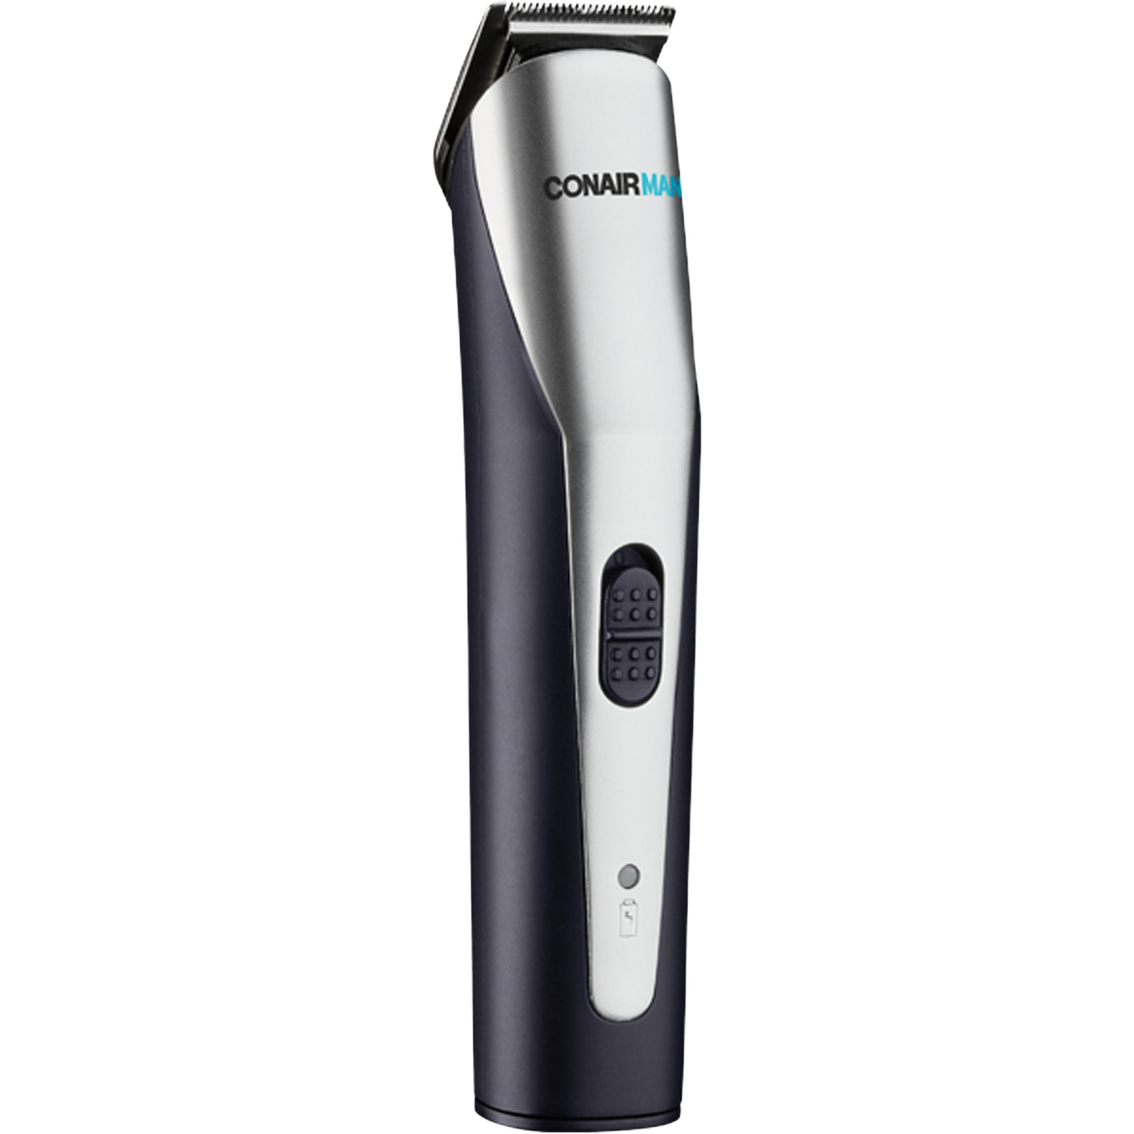 Conair ConairMan All-in-One Face and Body Trimmer - Image 2 of 4